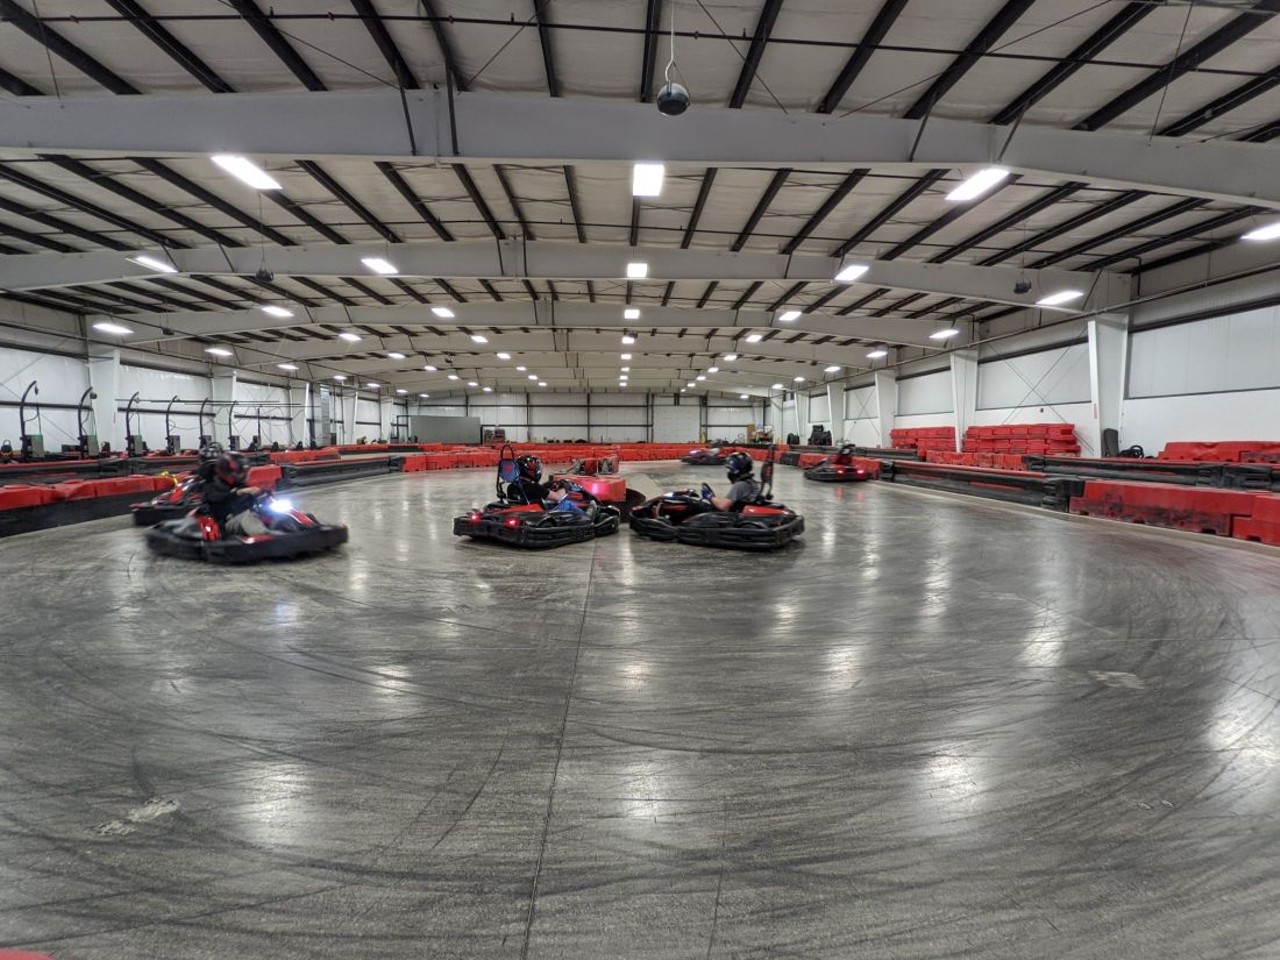  Go Indoor Go-Karting and Axe-Throwing at Boss Pro-Karting and Axe Throwing
18301 Brookpark Rd., Cleveland  
What better way to get some of that aggression out then throwing axes and speeding around a track on a golf kart? That&#146;s what you can accomplish at Boss Pro-Karting, just a few minutes away from the airport.
Photo via Boss-Karting/Facebook